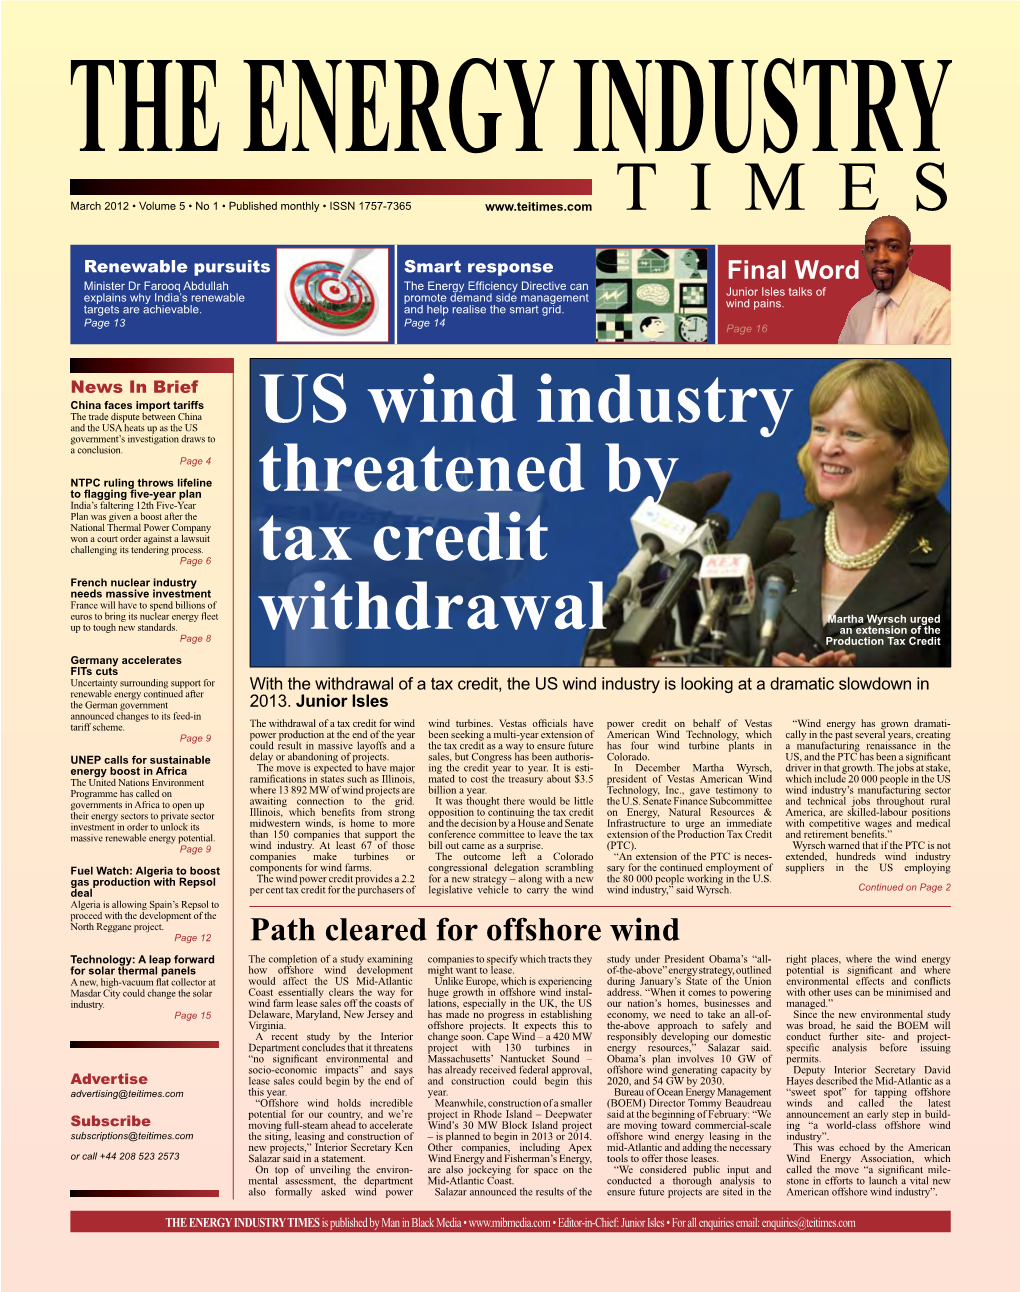 US Wind Industry Threatened by Tax Credit Withdrawal